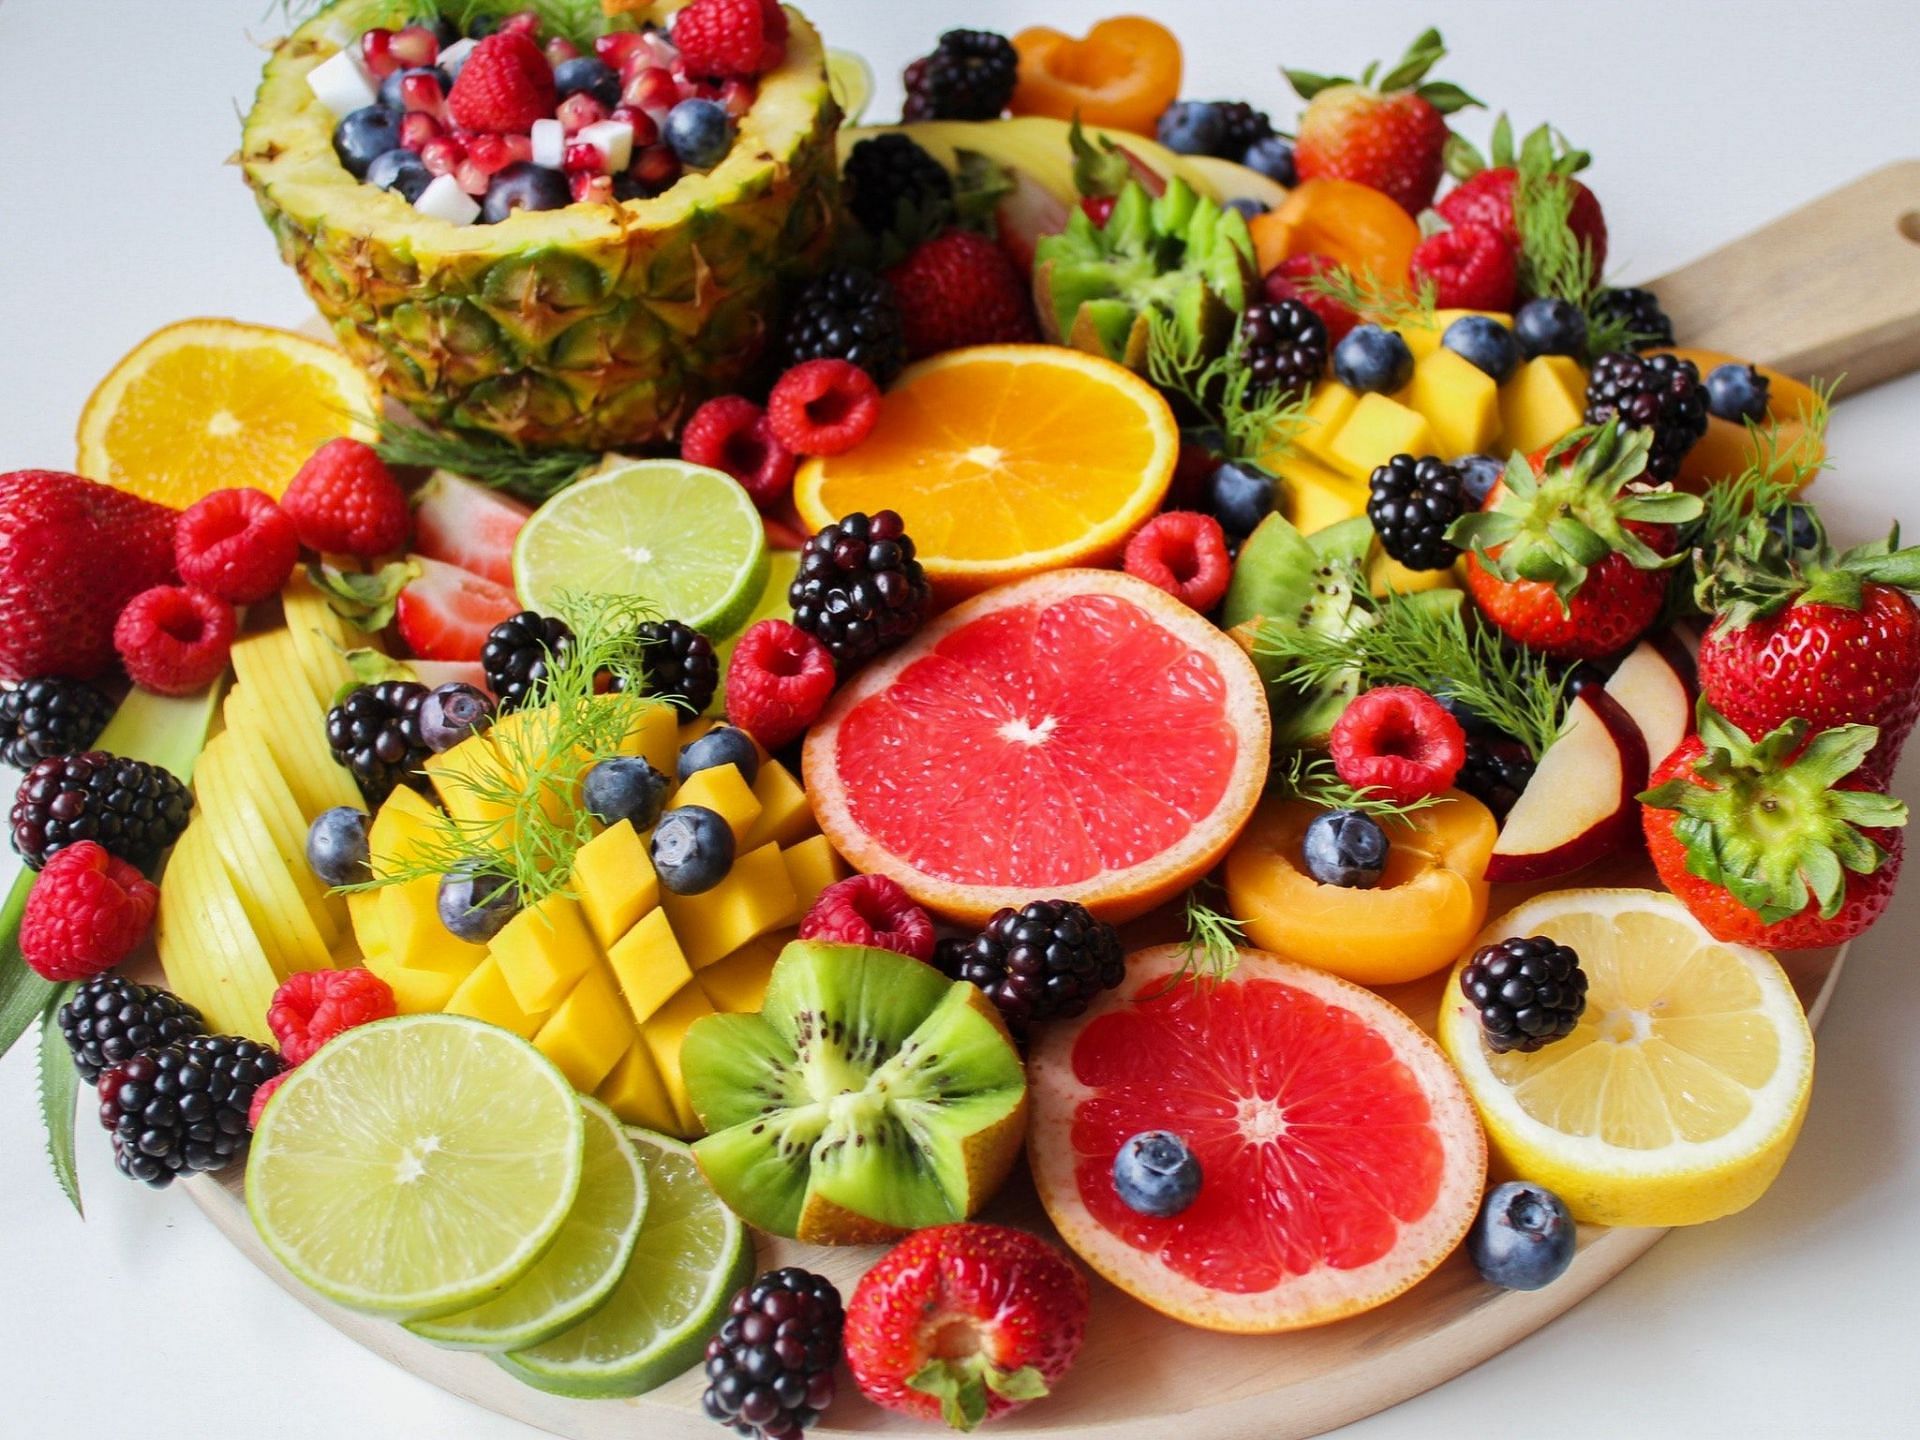 A diet rich in fruits and vegetables is good for dental health, (Image via Pexels)